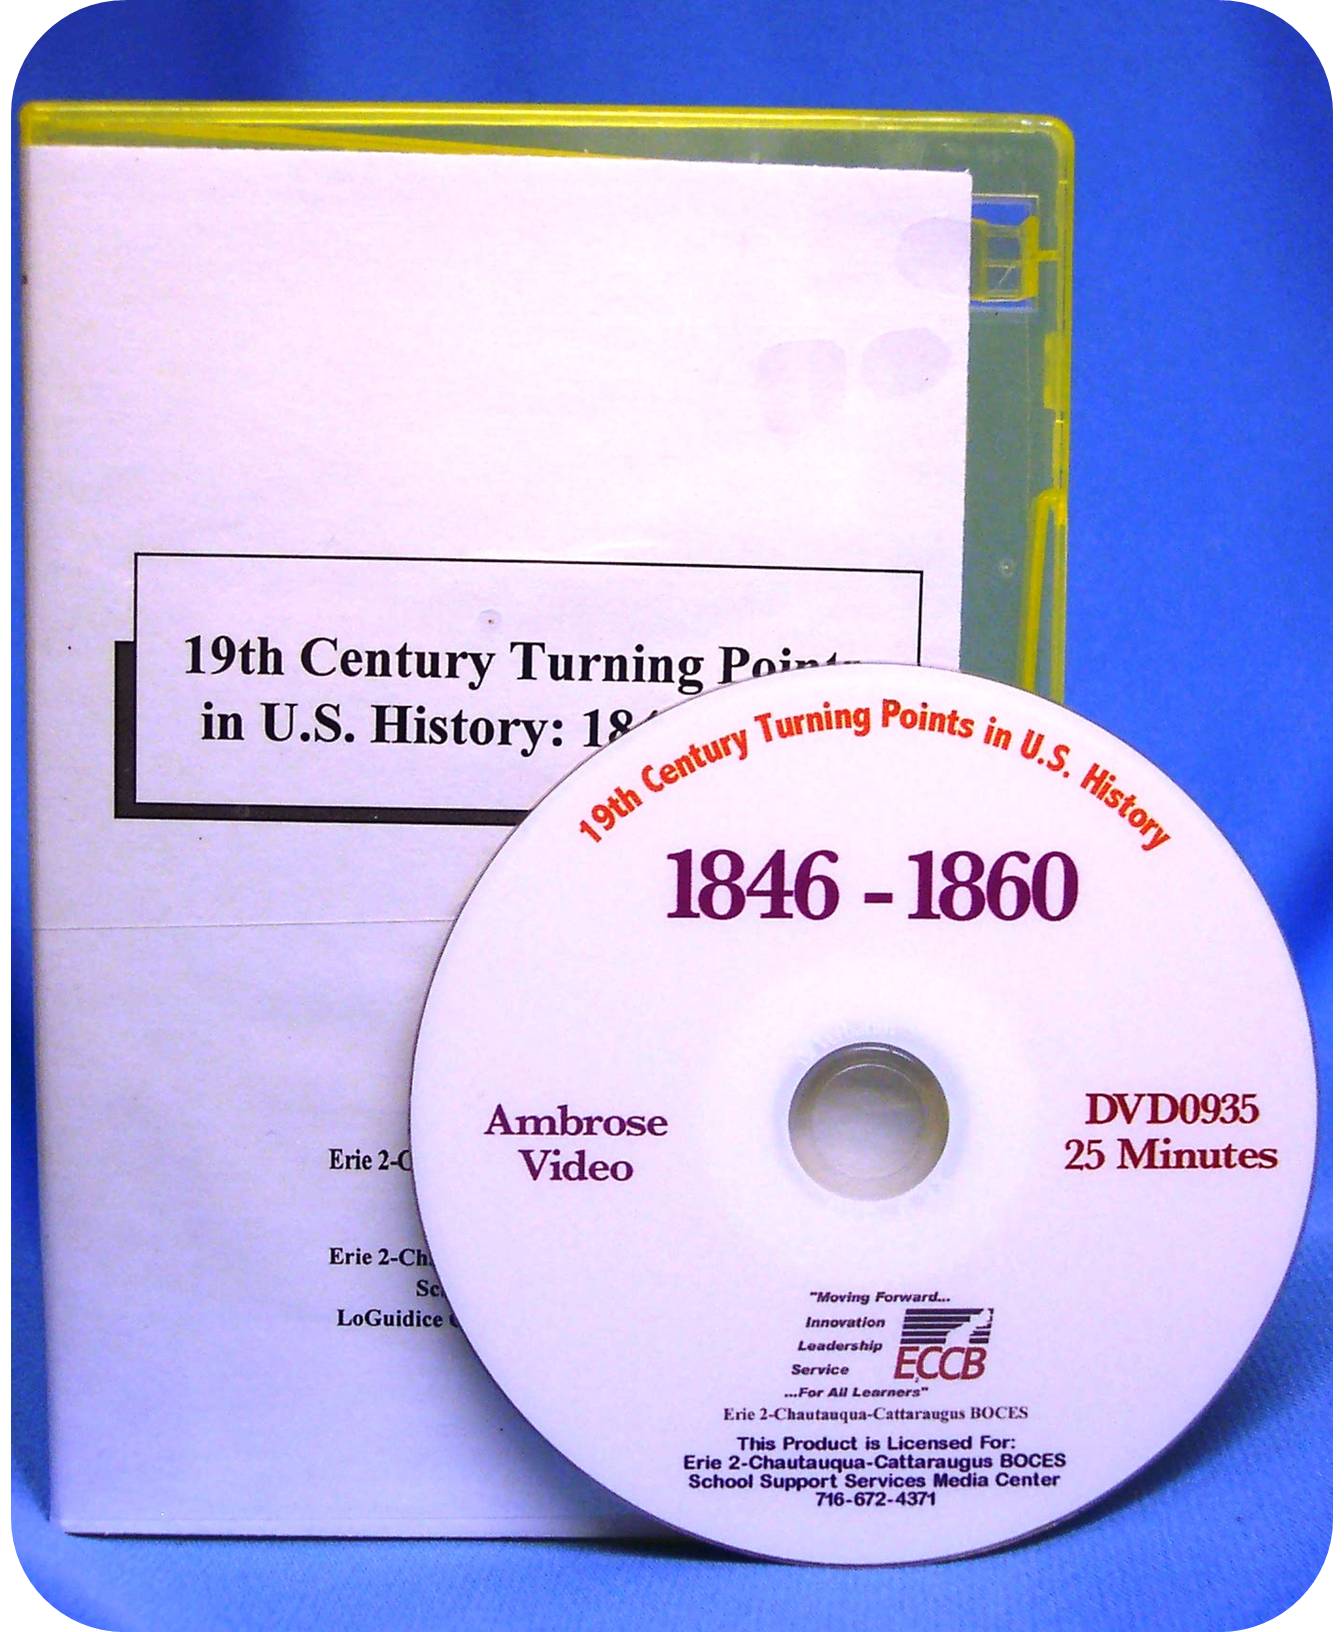 19th Century Turning Points in U.S. History: 1846 - 1860